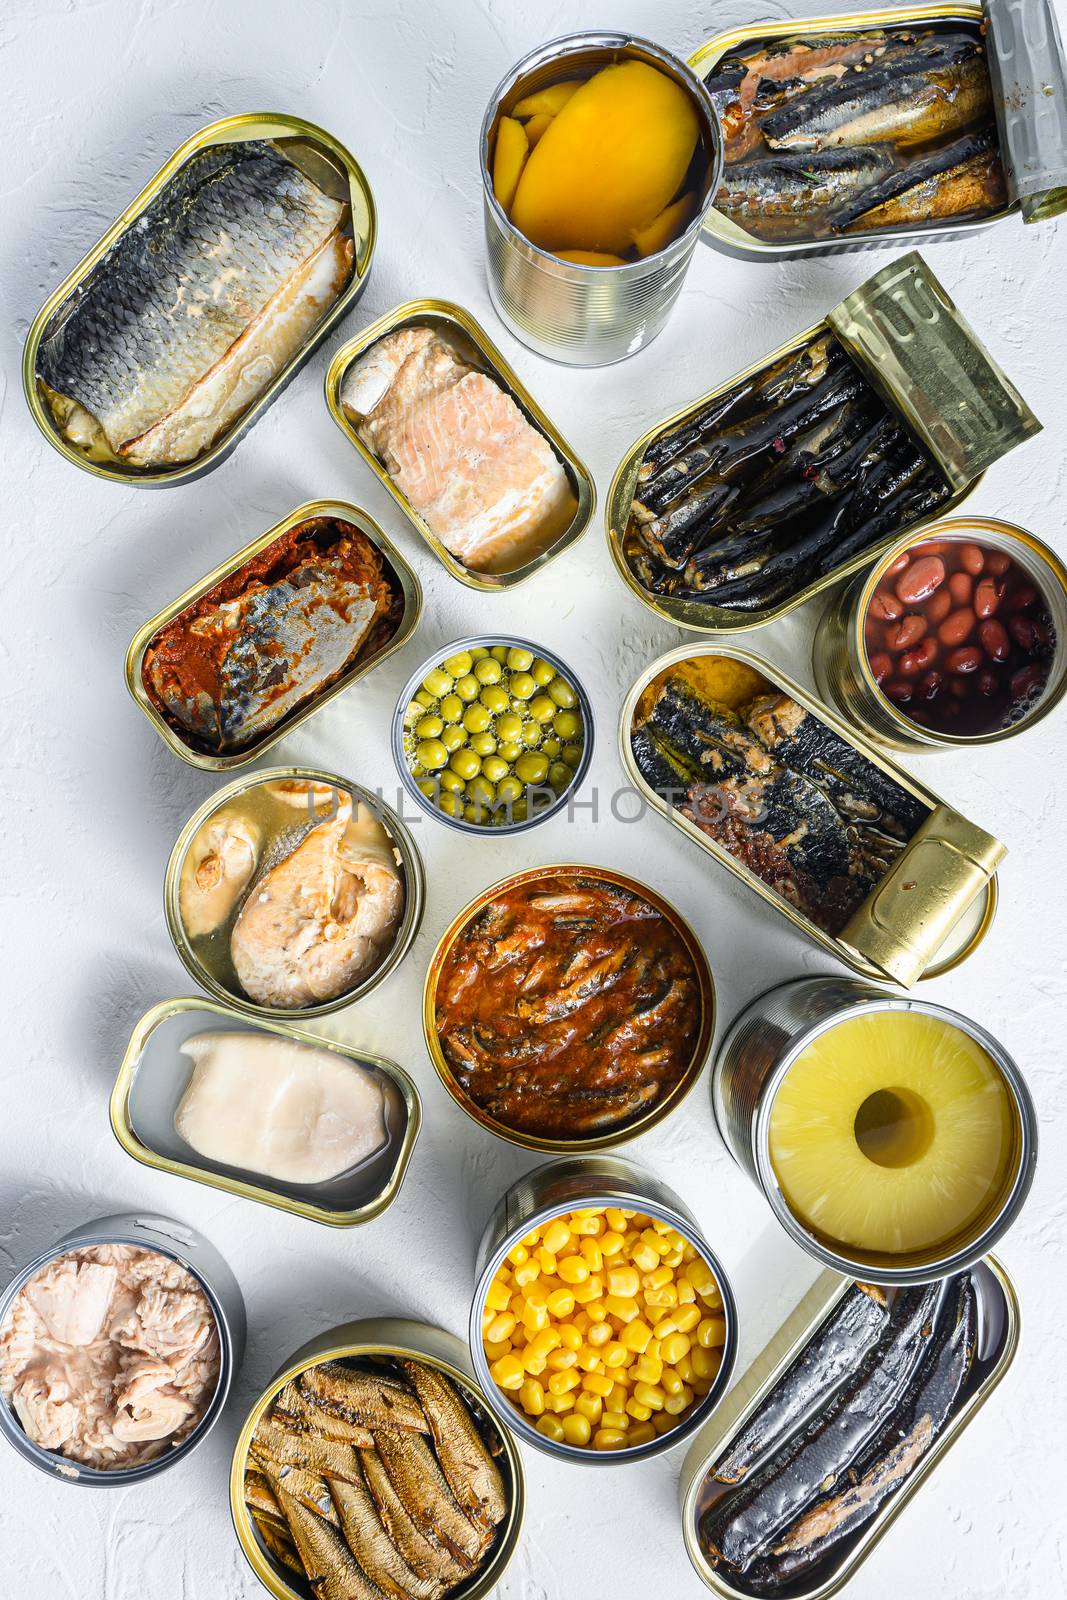 Set aluminium and tin cans with Saury, mackerel, sprats, sardinesover white textured background vertical top view.